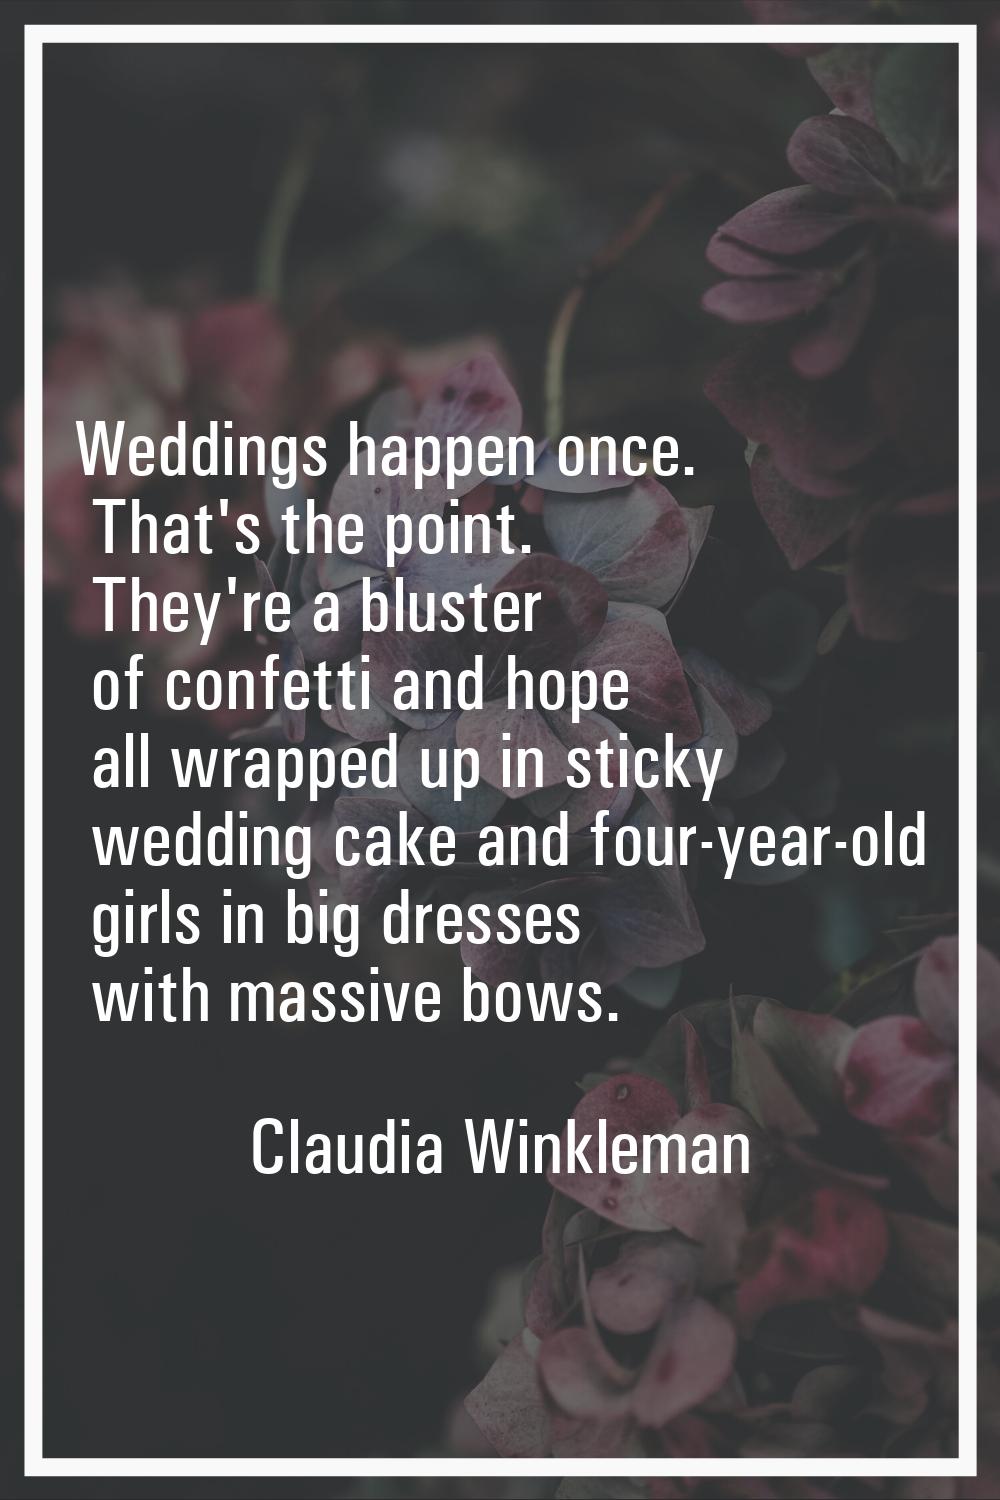 Weddings happen once. That's the point. They're a bluster of confetti and hope all wrapped up in st